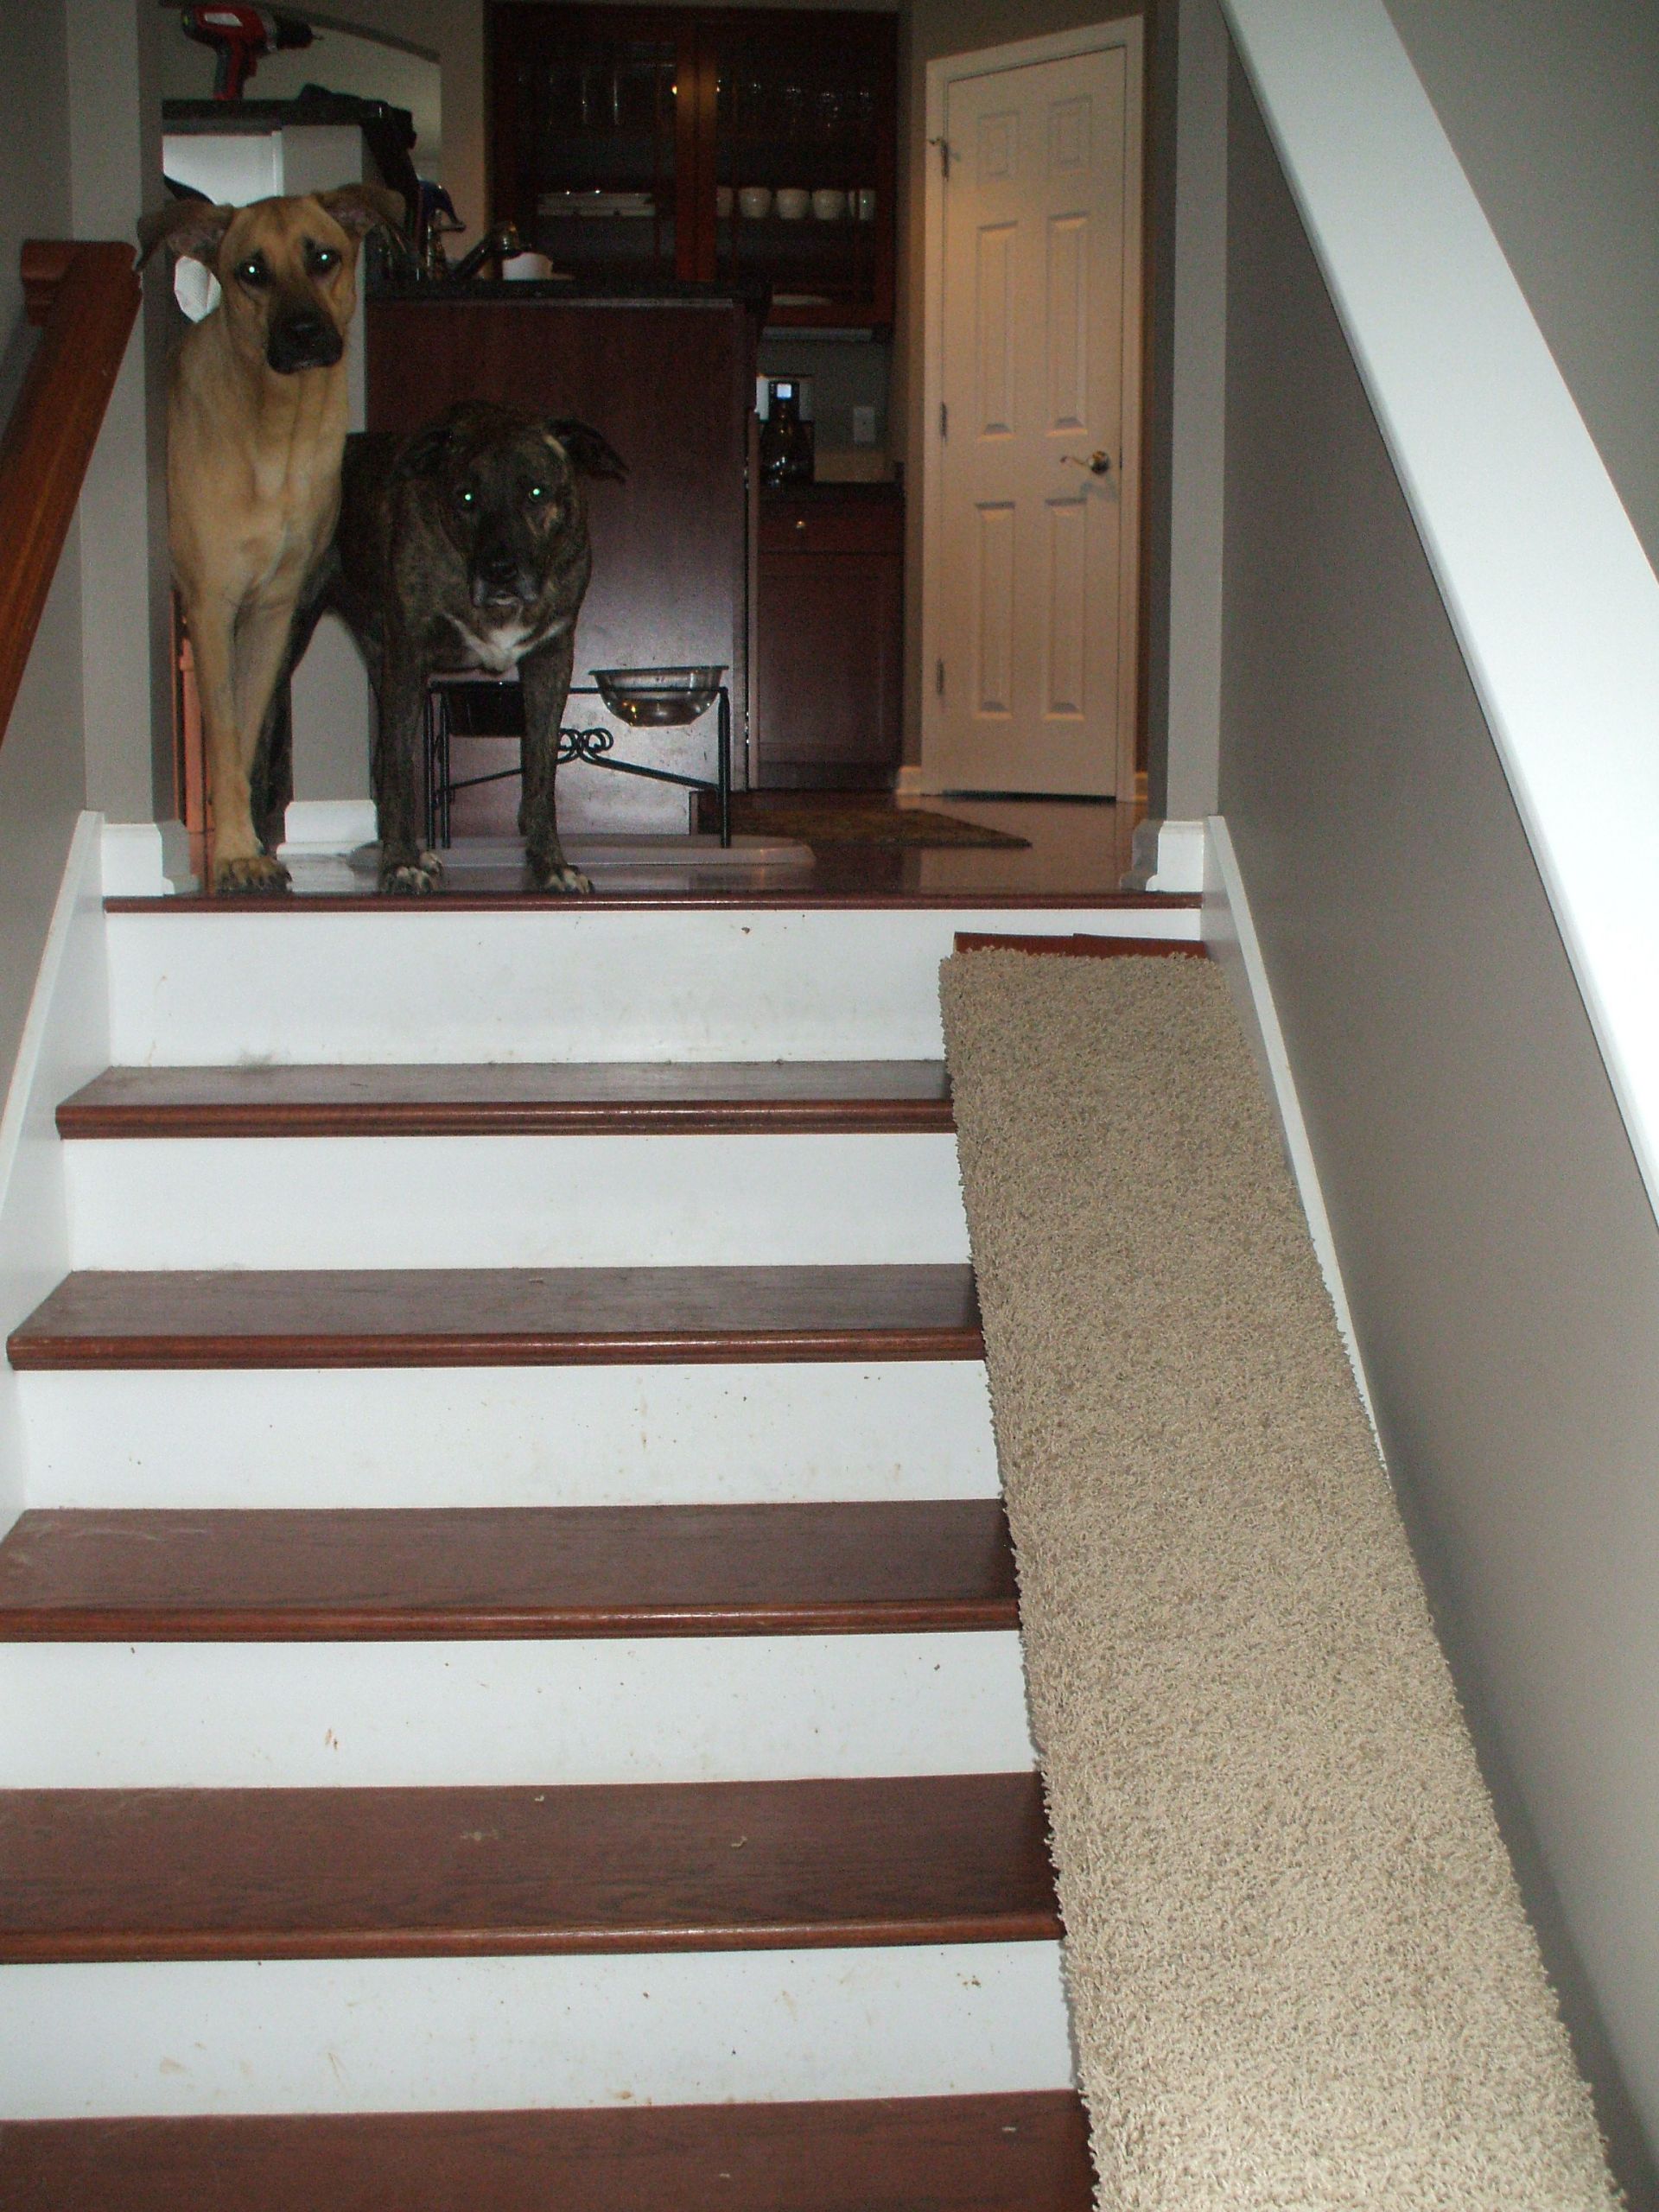 DIY Dog Ramp For Stairs
 [Help] Does going up and down stairs every day affect my